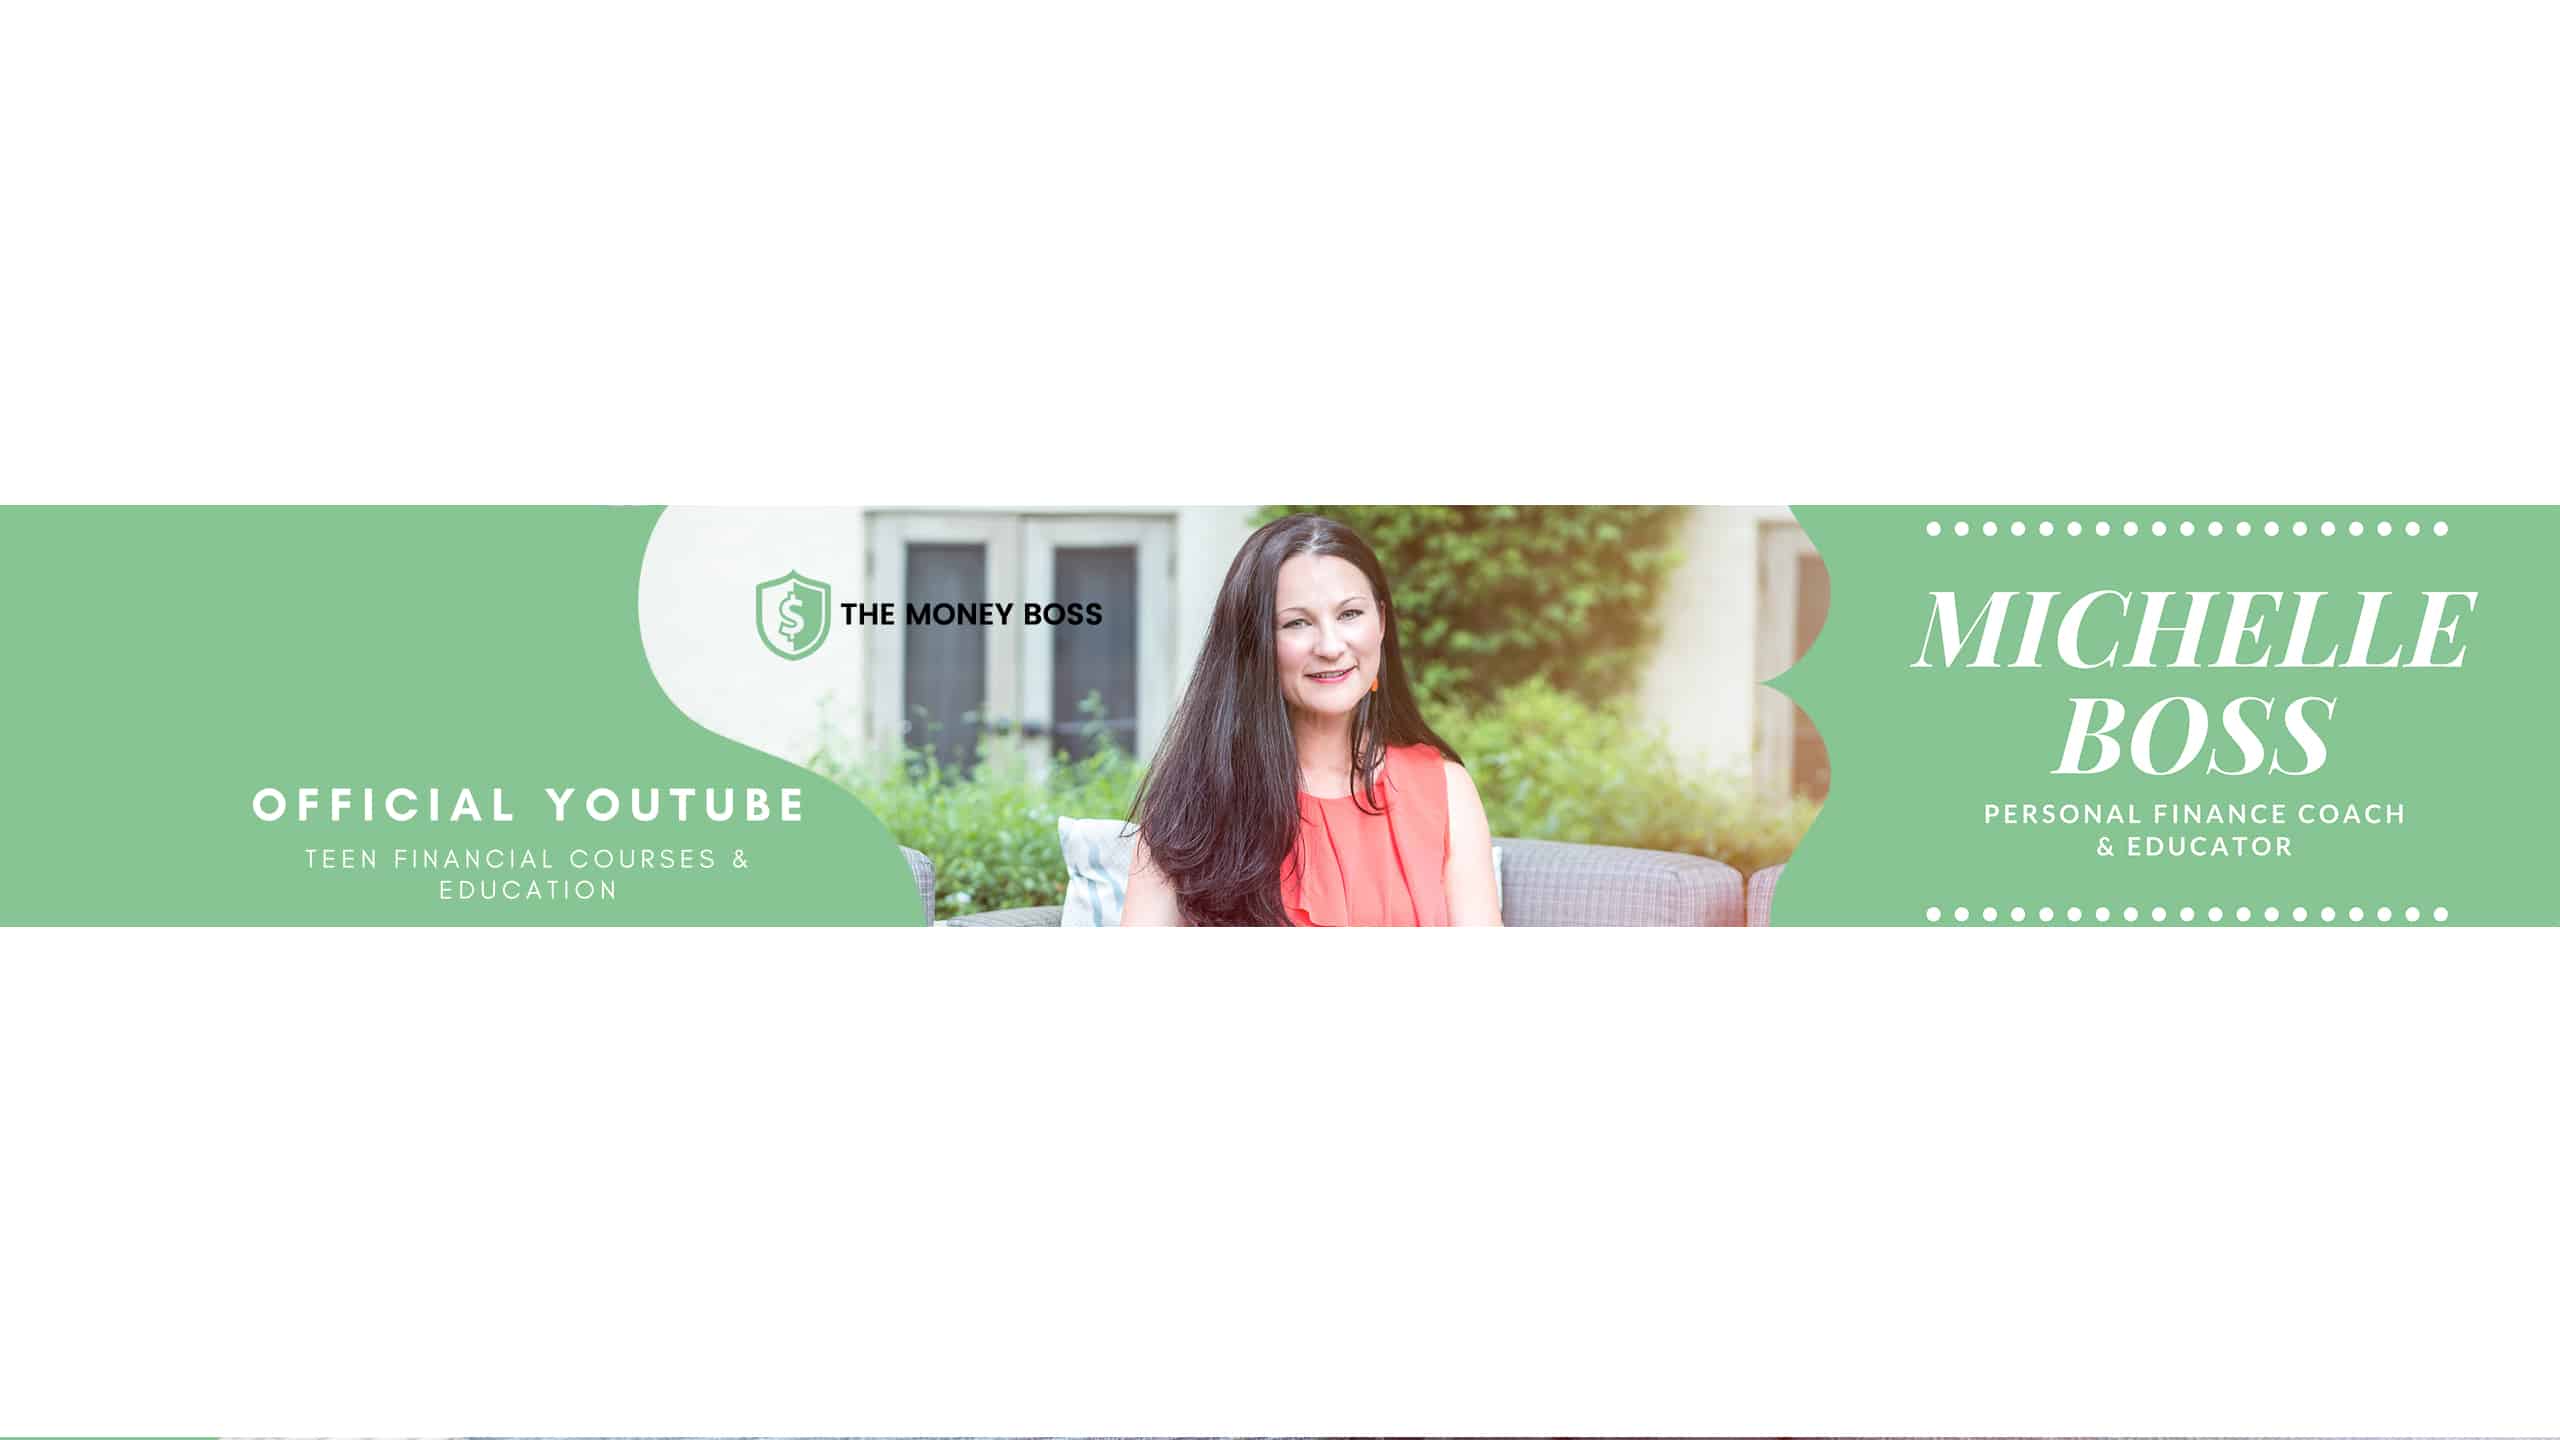 A promotional banner featuring michelle boss, a personal finance coach and educator, highlighting her role as 'the money boss' with a focus on teen financial courses and education. the image shows michelle smiling confidently in an outdoor setting with a professional and approachable demeanor.